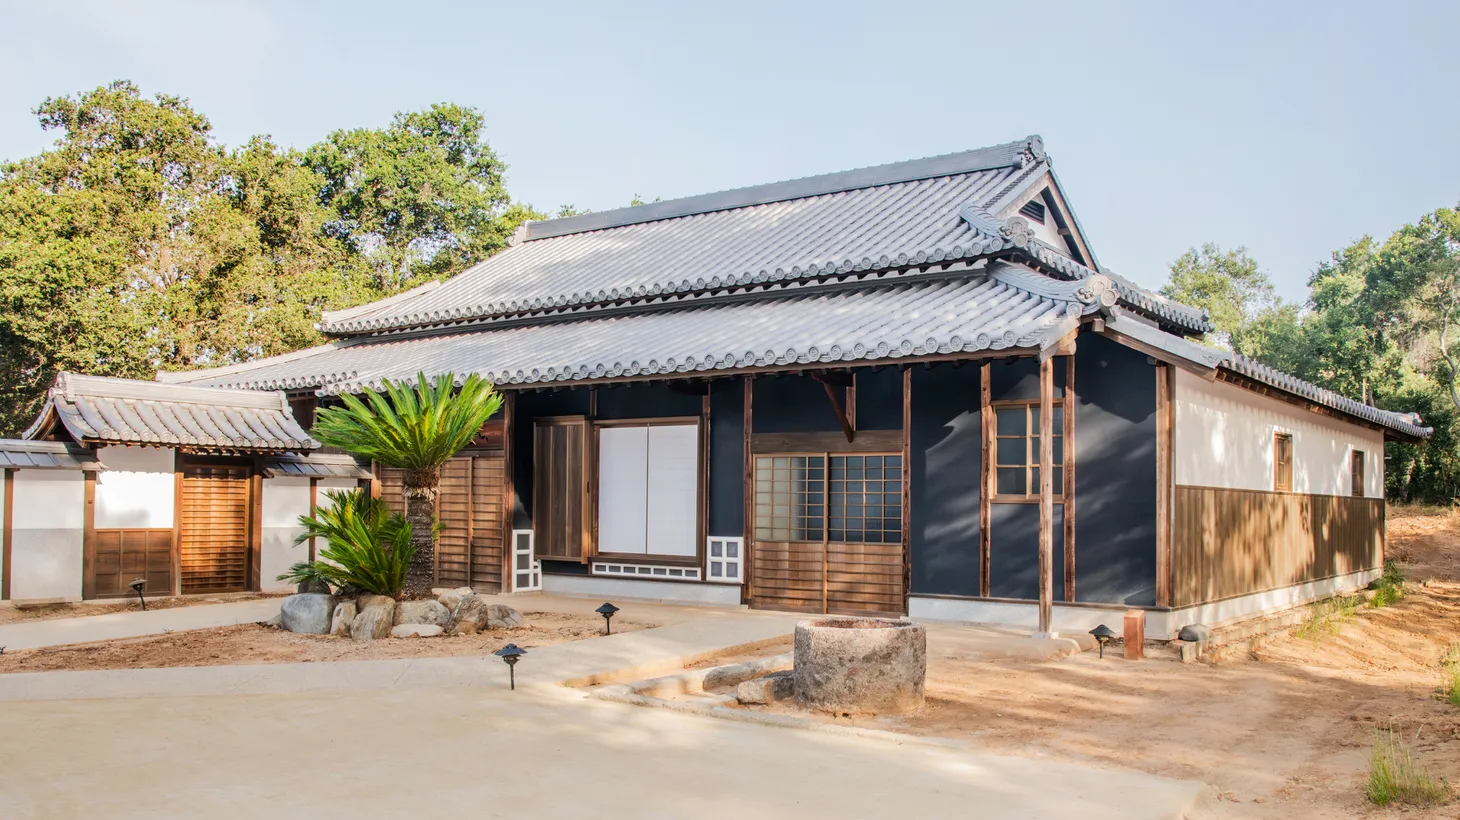 The Shōya house had two entrances — one reserved for feudal lords and another for everyone else.